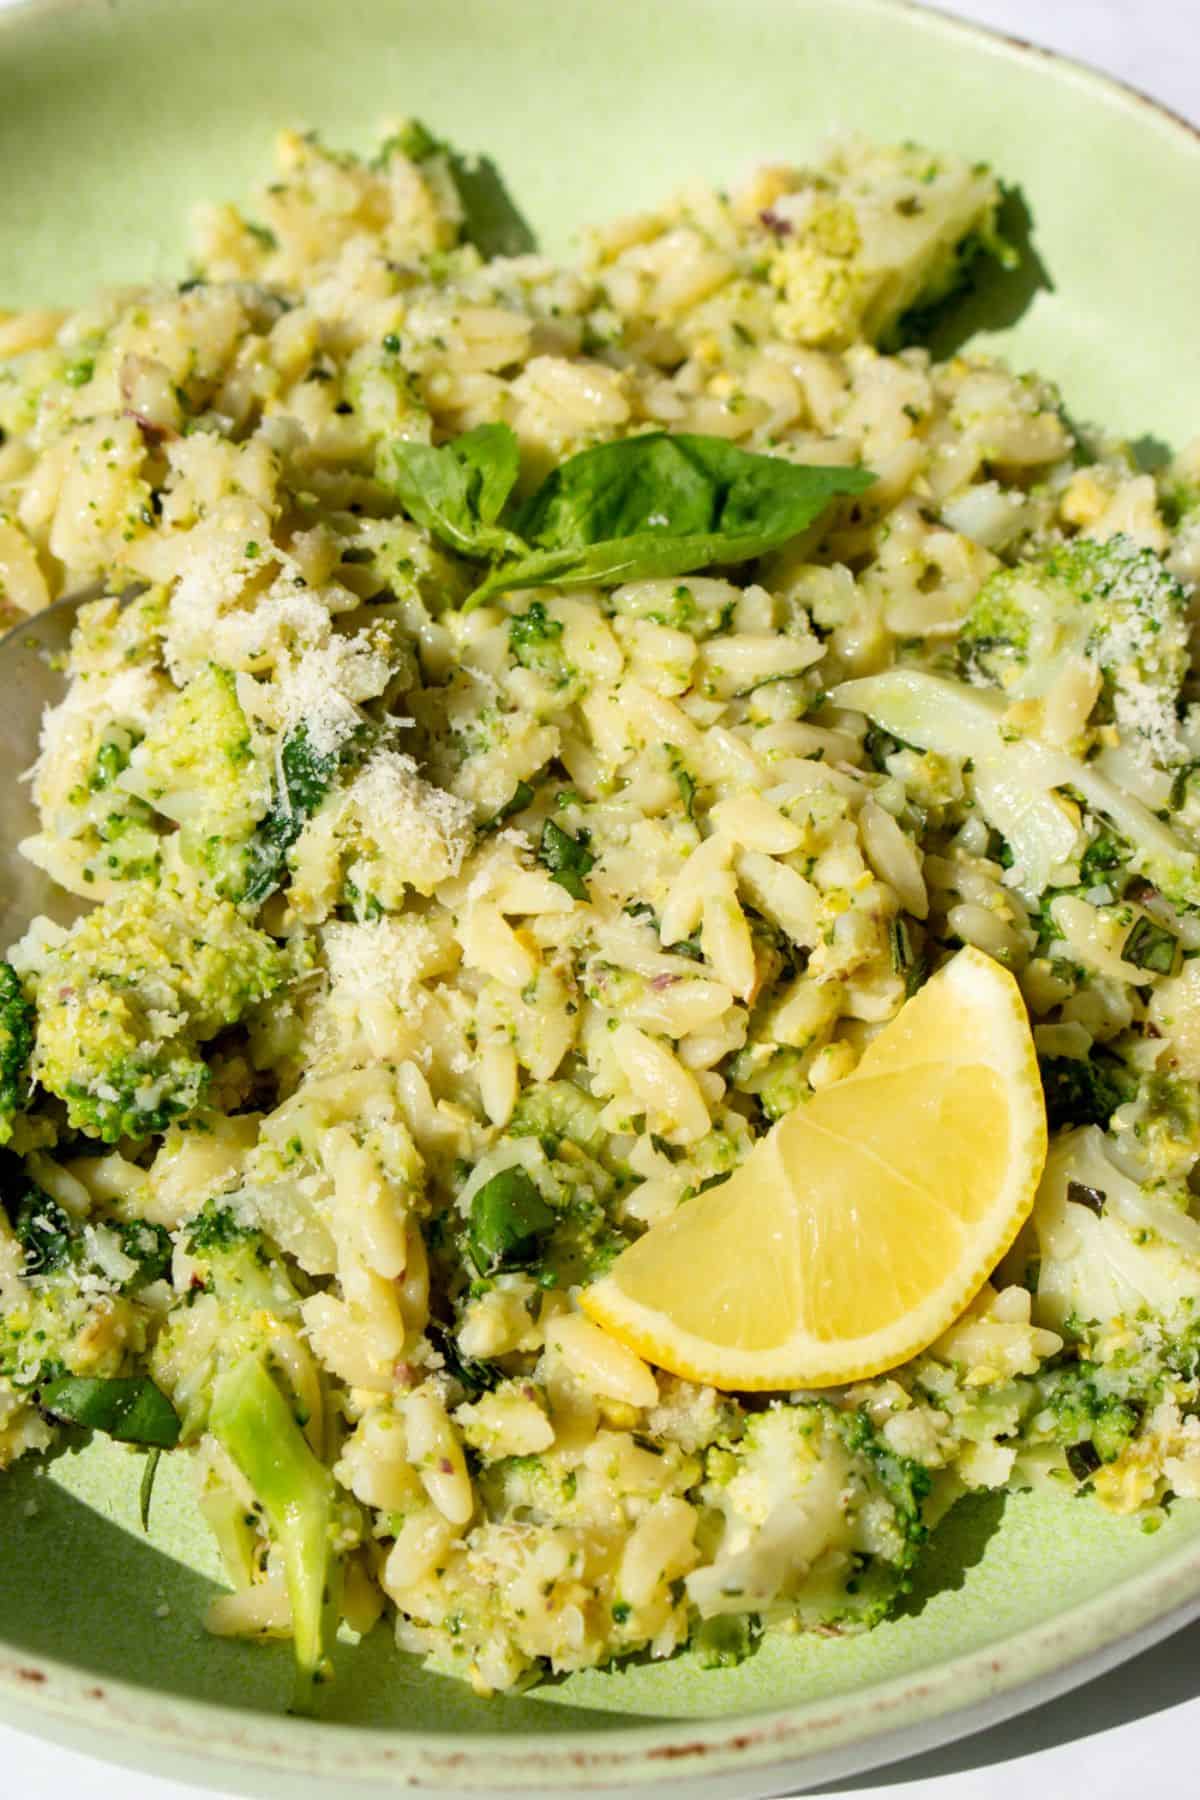 Close up with pieces of broccoli, pesto and orzo in a bowl with a lemon wedge.